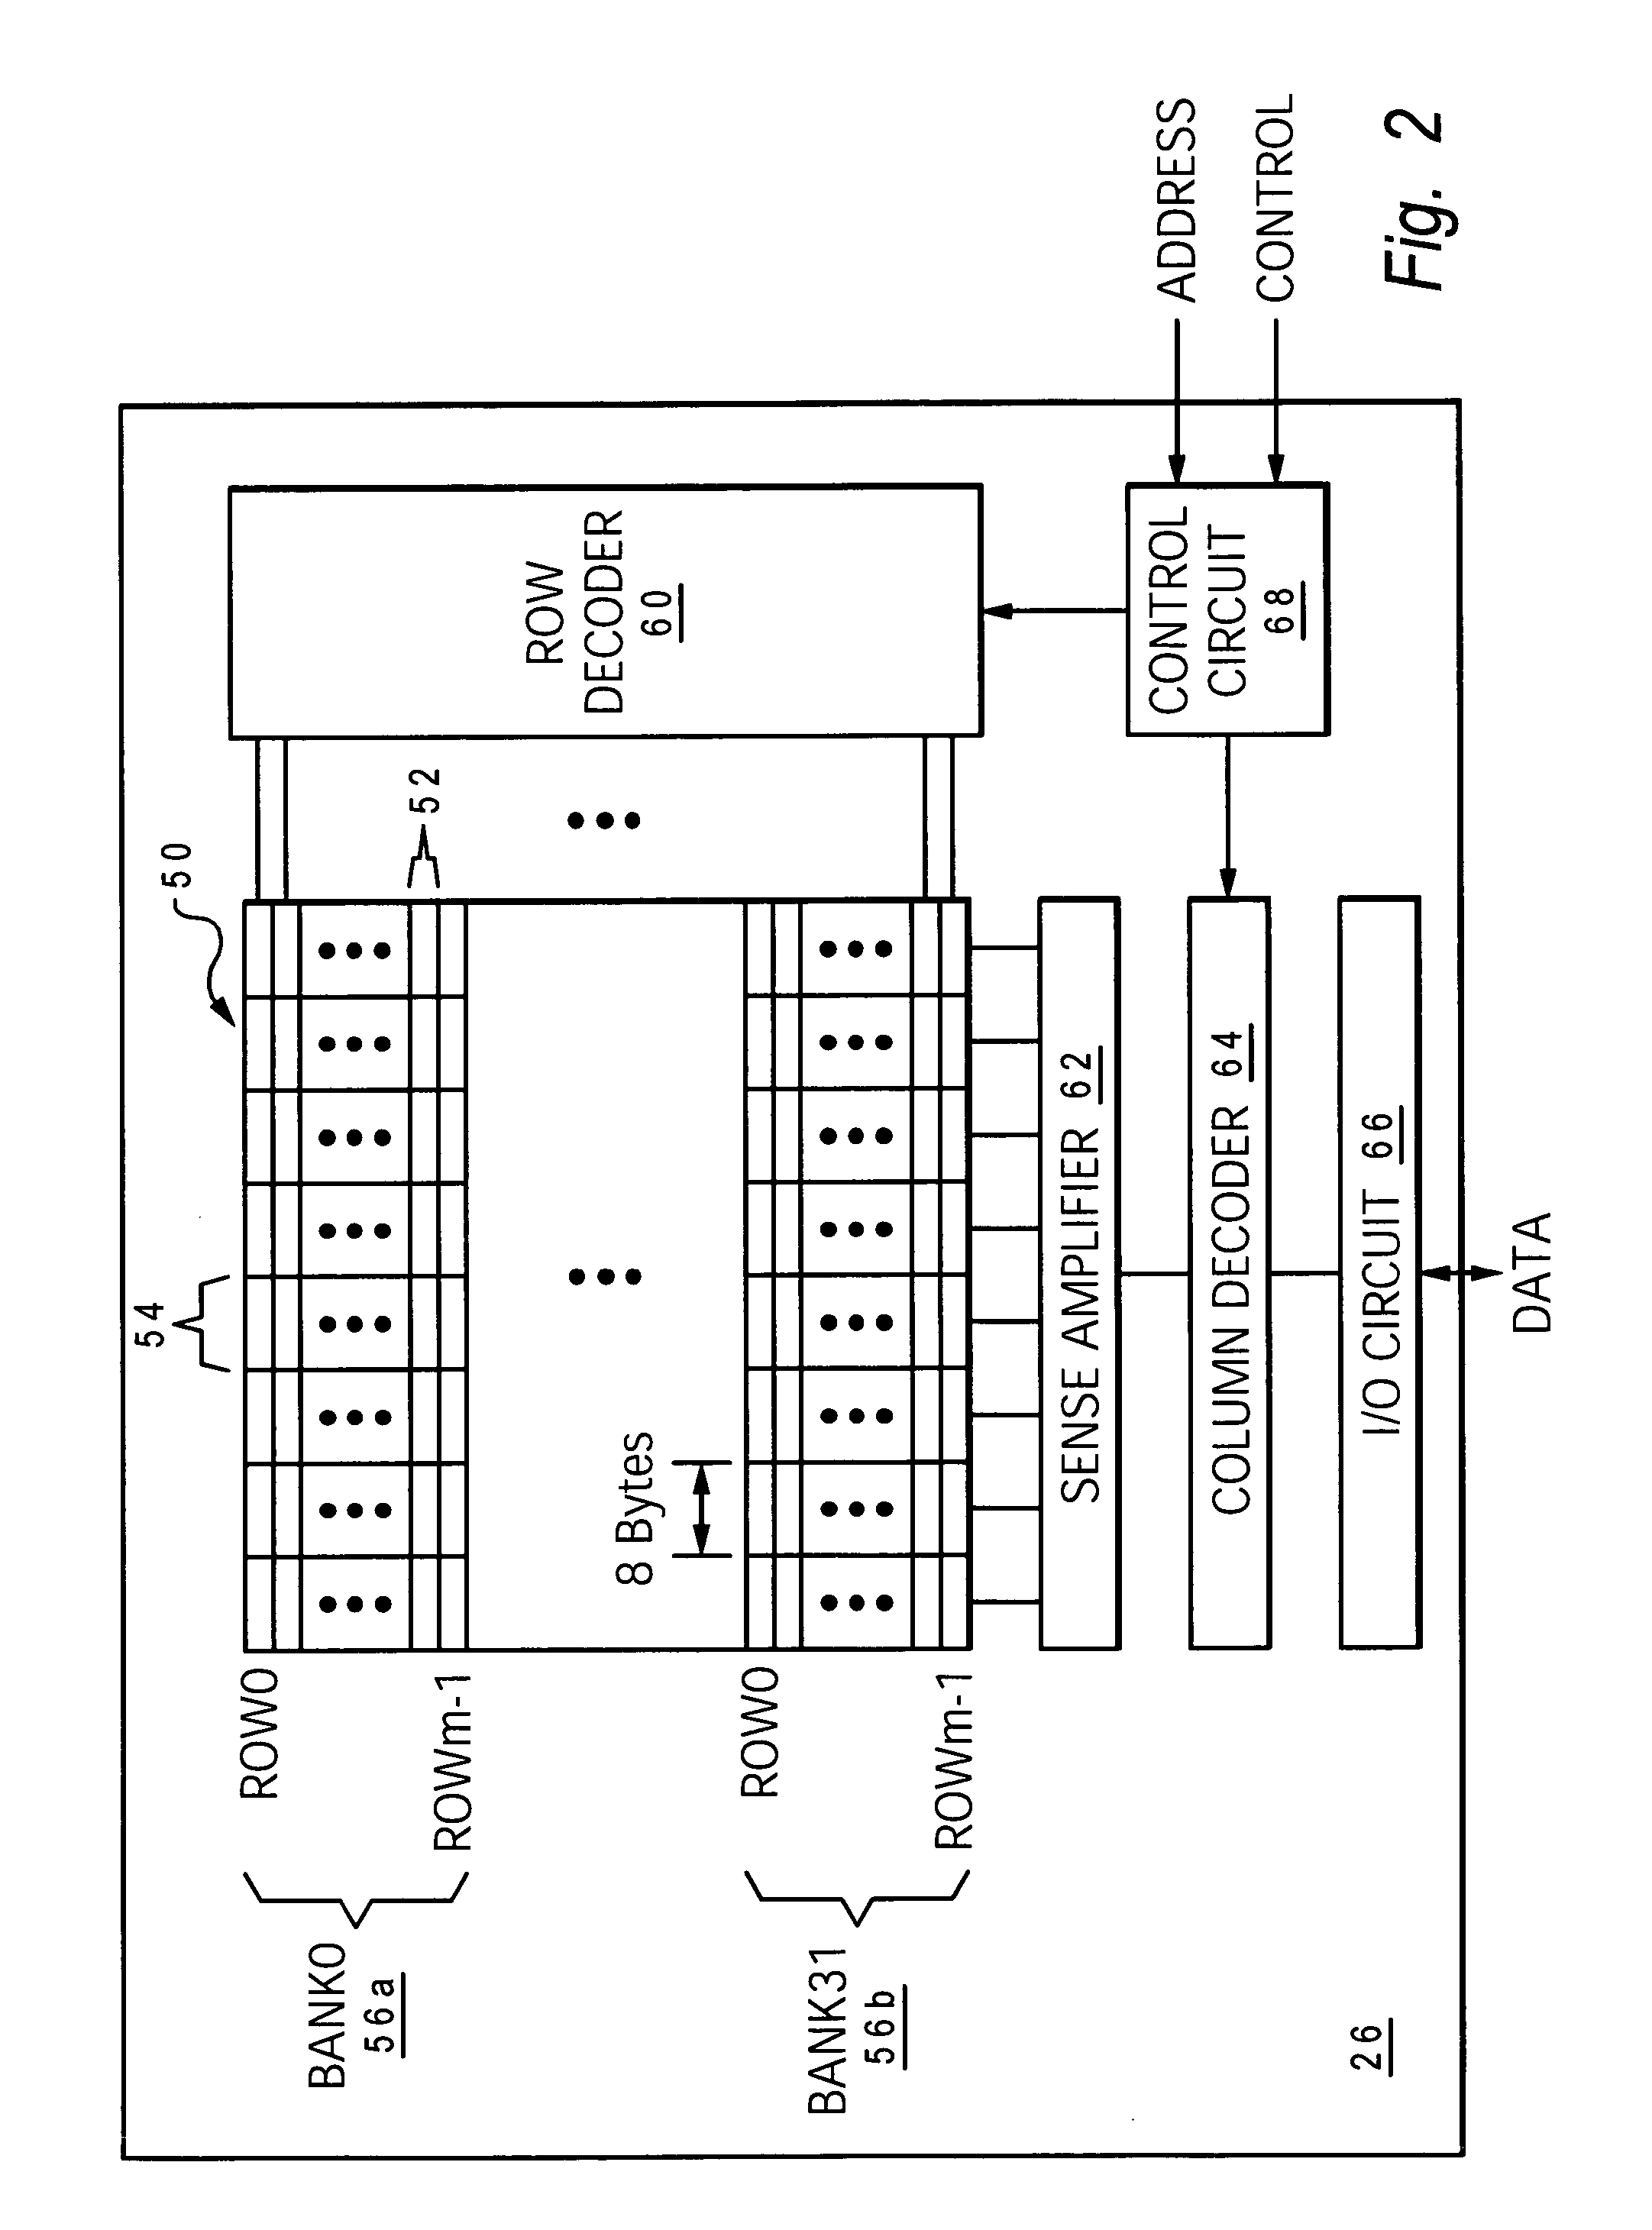 Method and system for thread-based memory speculation in a memory subsystem of a data processing system